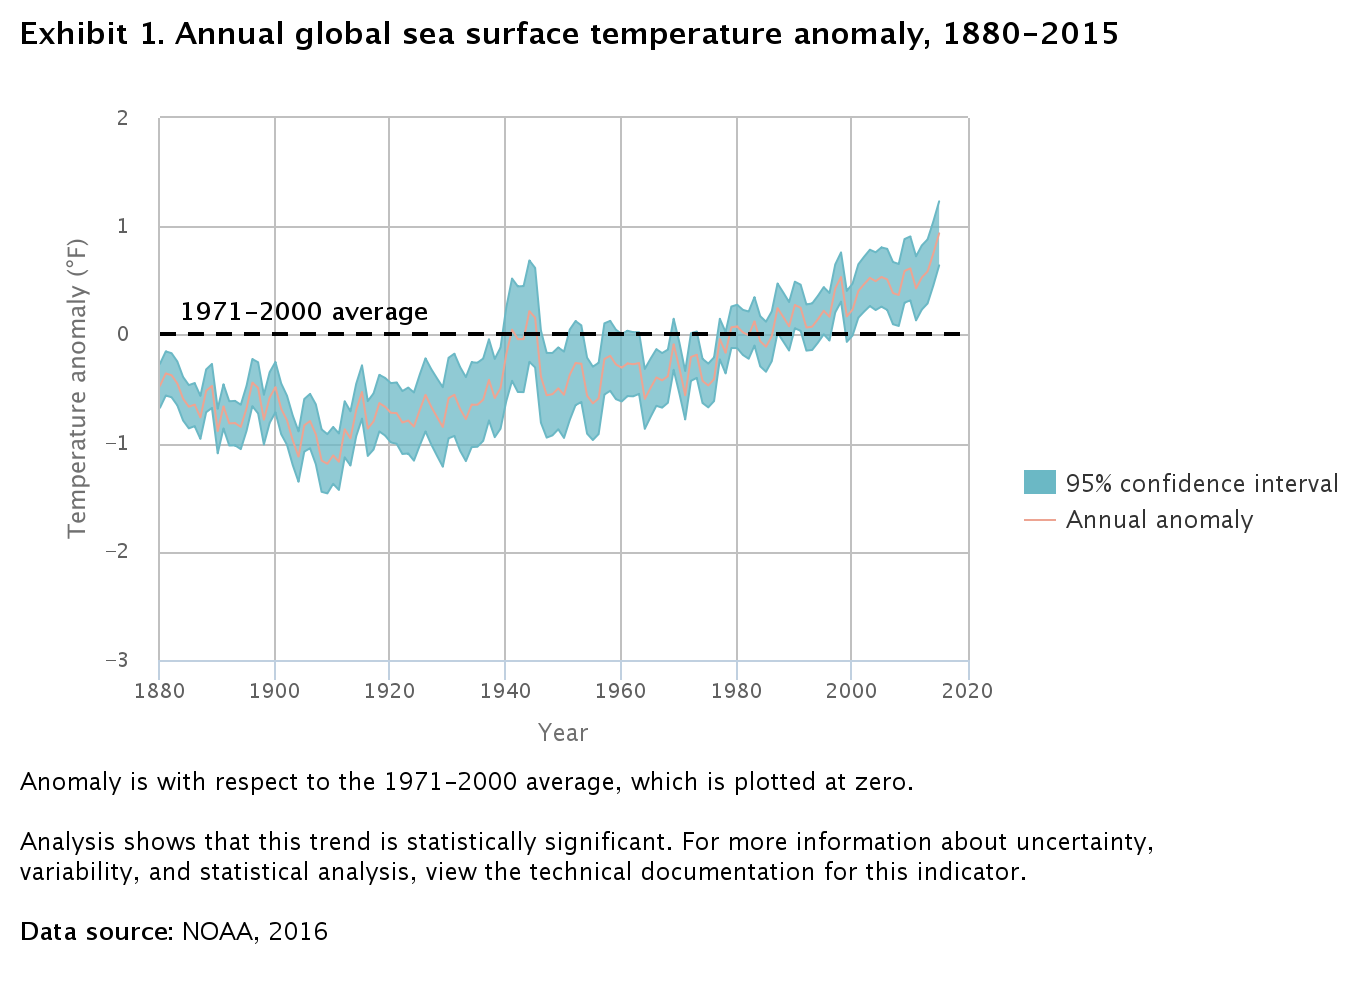 Exhibit 1. Annual global sea surface temperature anomaly, 1880-2015